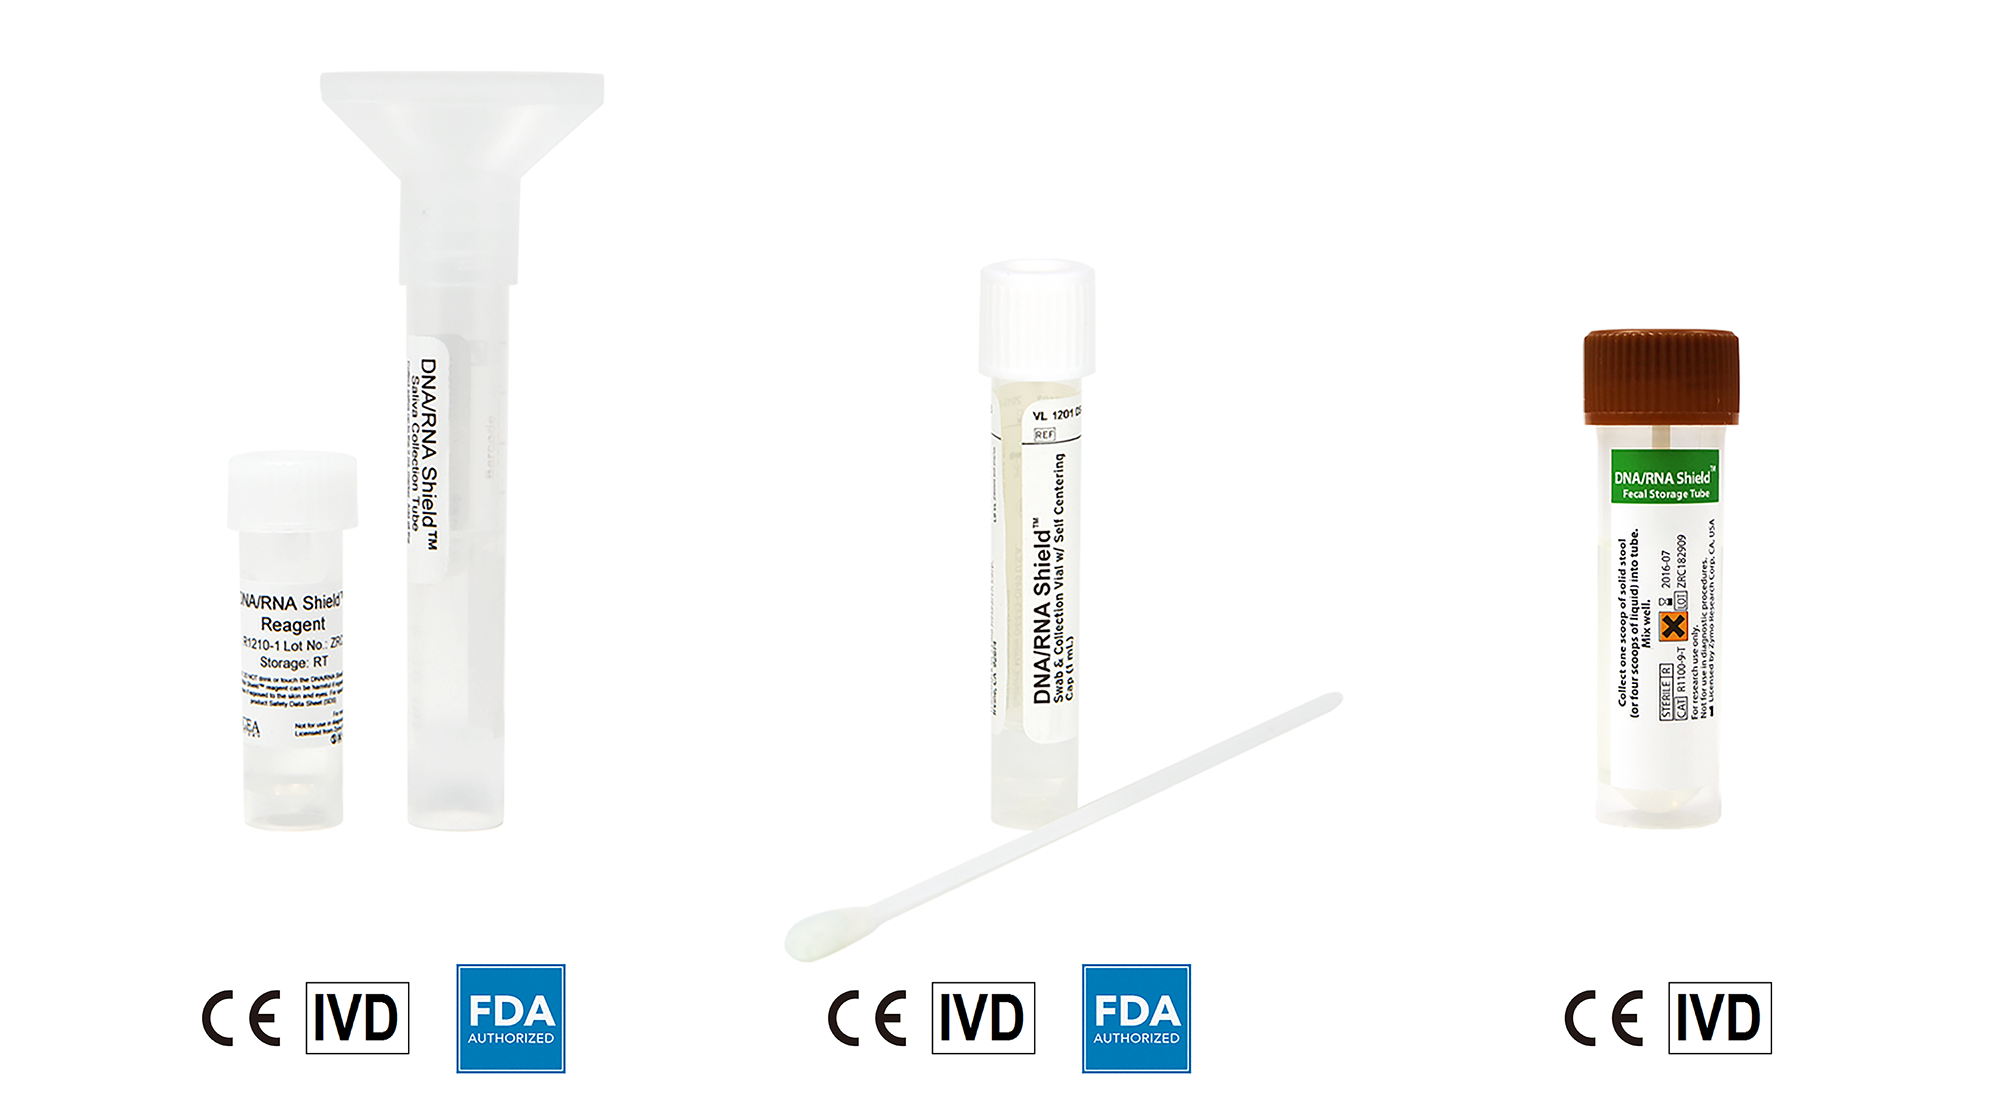 Zymo Research was granted the CE IVD mark for its DNA/RNA Shield™ reagent and collection devices.